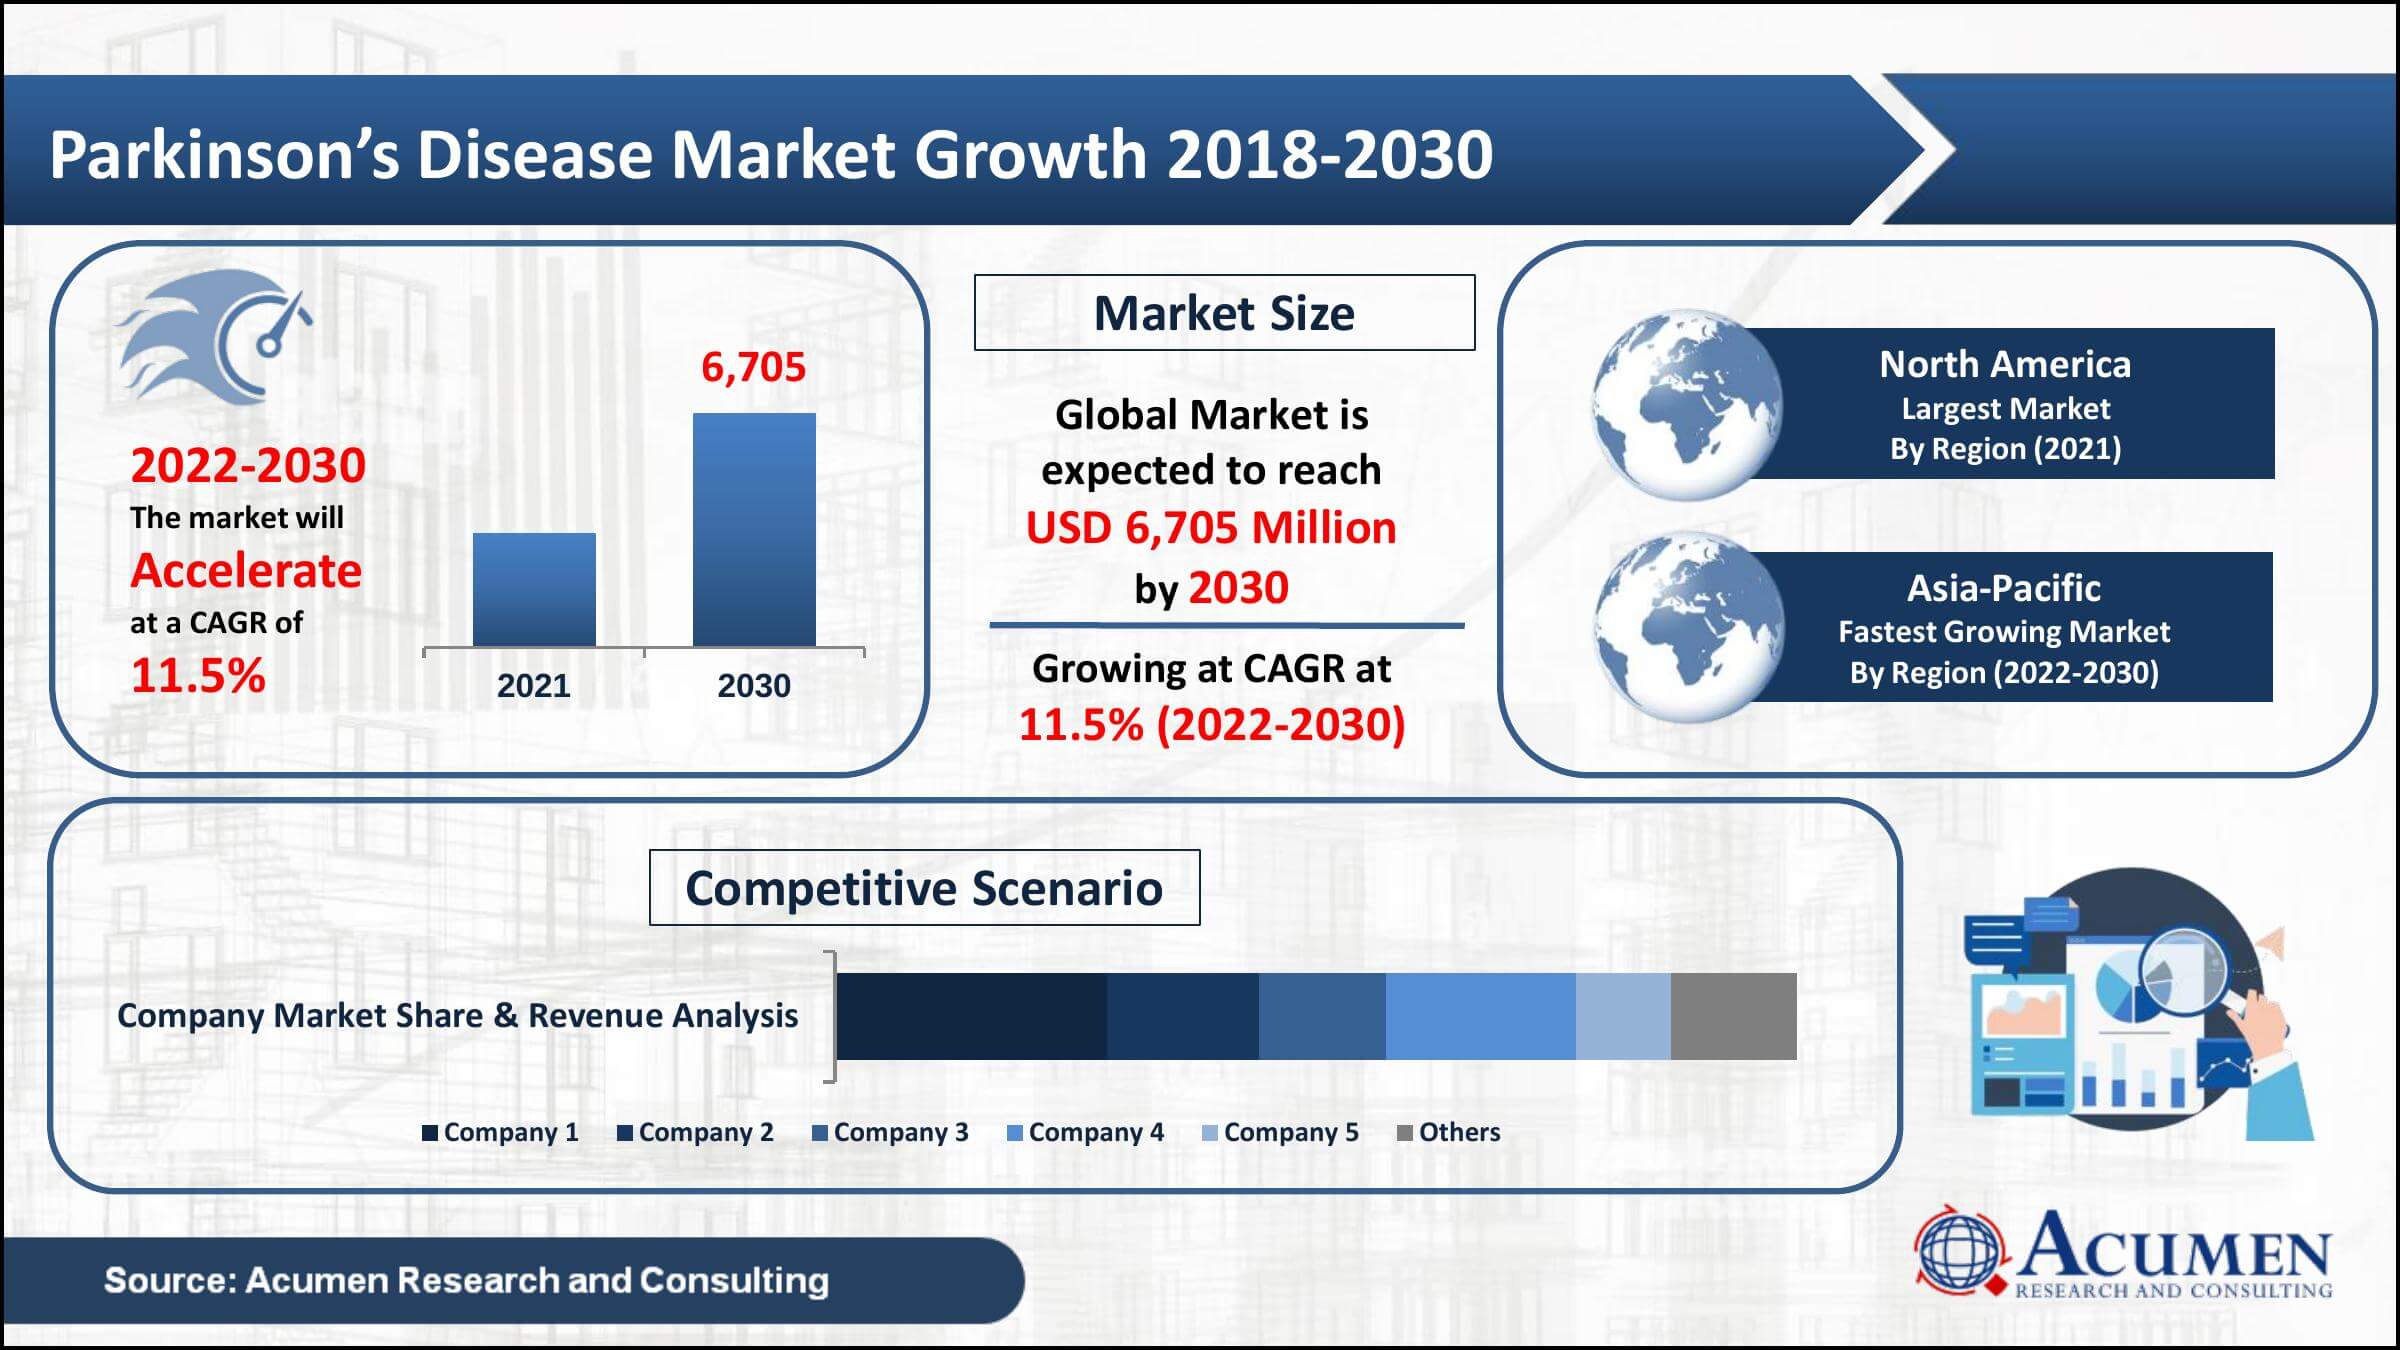 Global Parkinson’s disease market value was worth USD 2,540 Million in 2021, with a 11.5% CAGR from 2022 to 2030